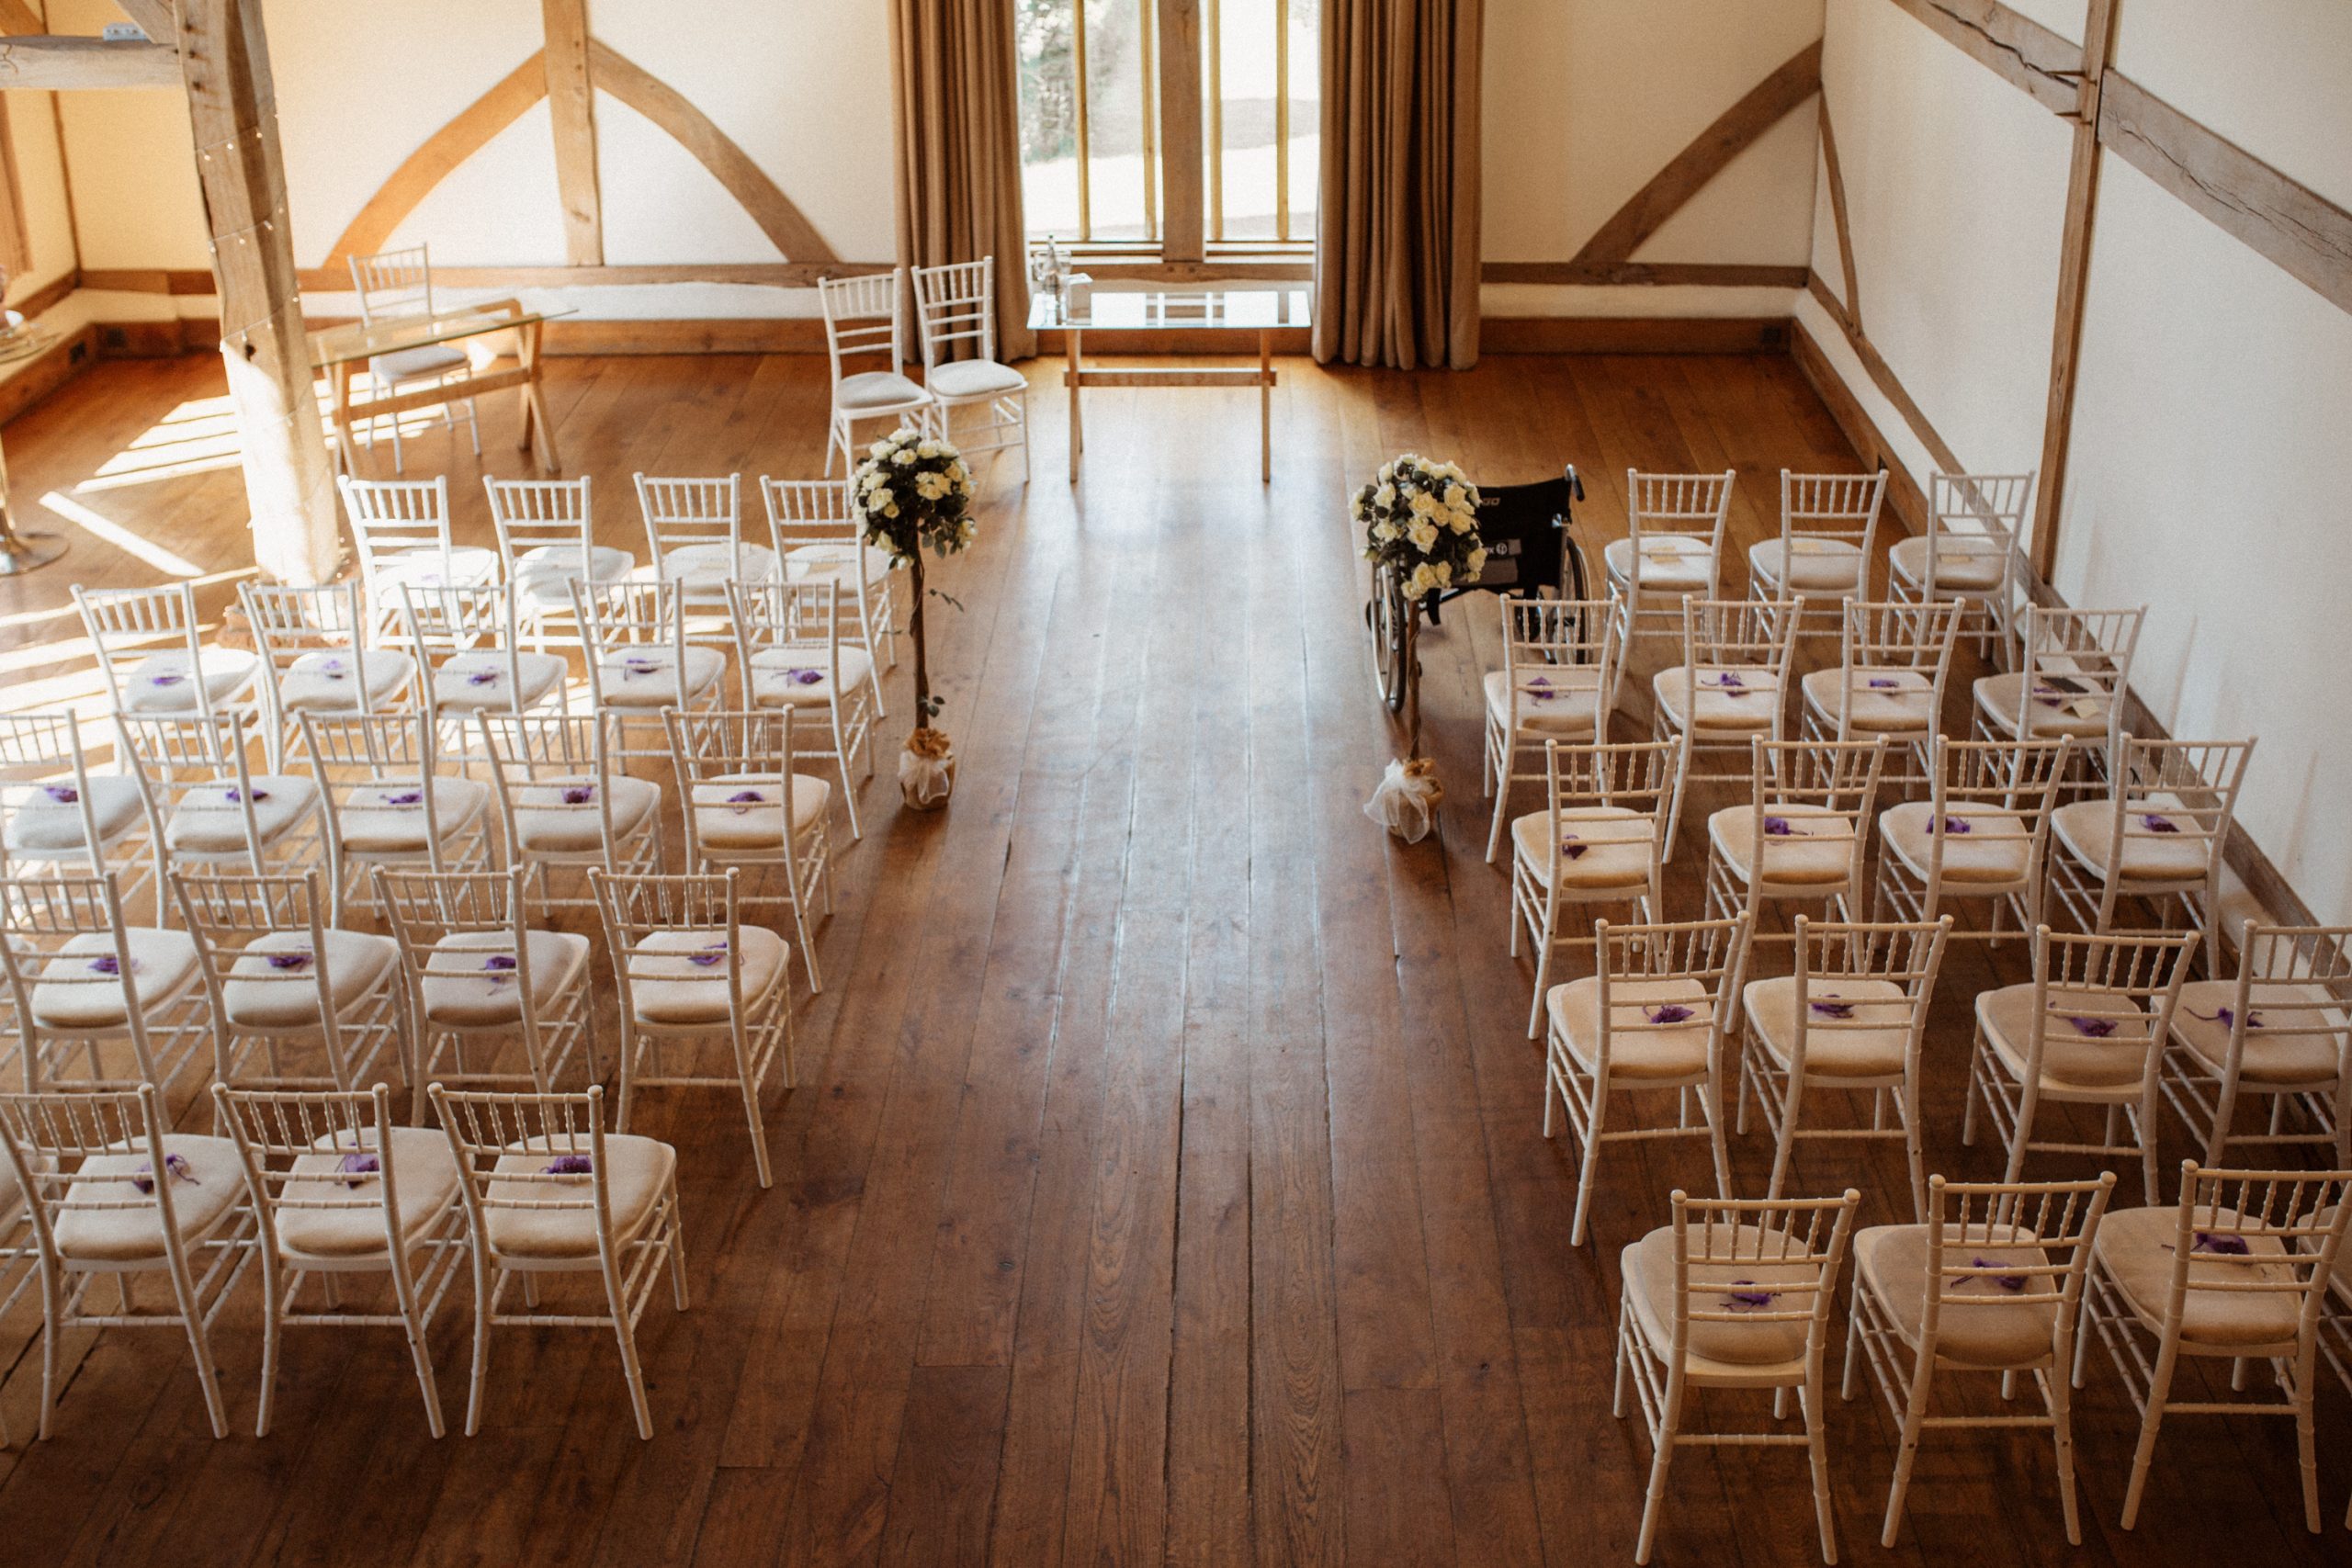 Ceremony room dressed at Cain Manor